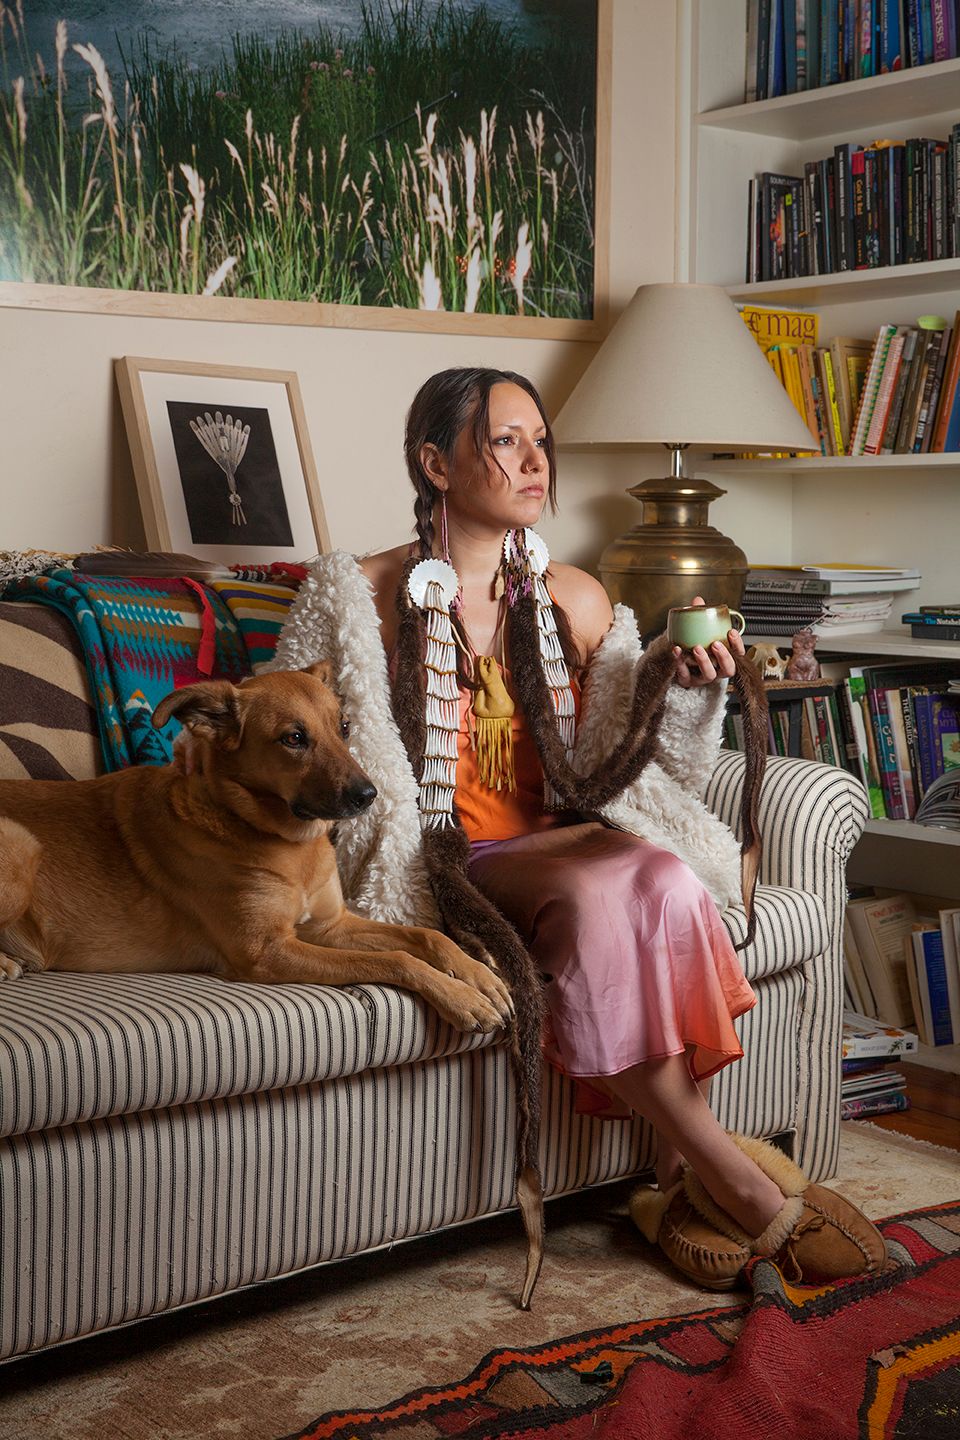 A portrait of Kite at home with her dog